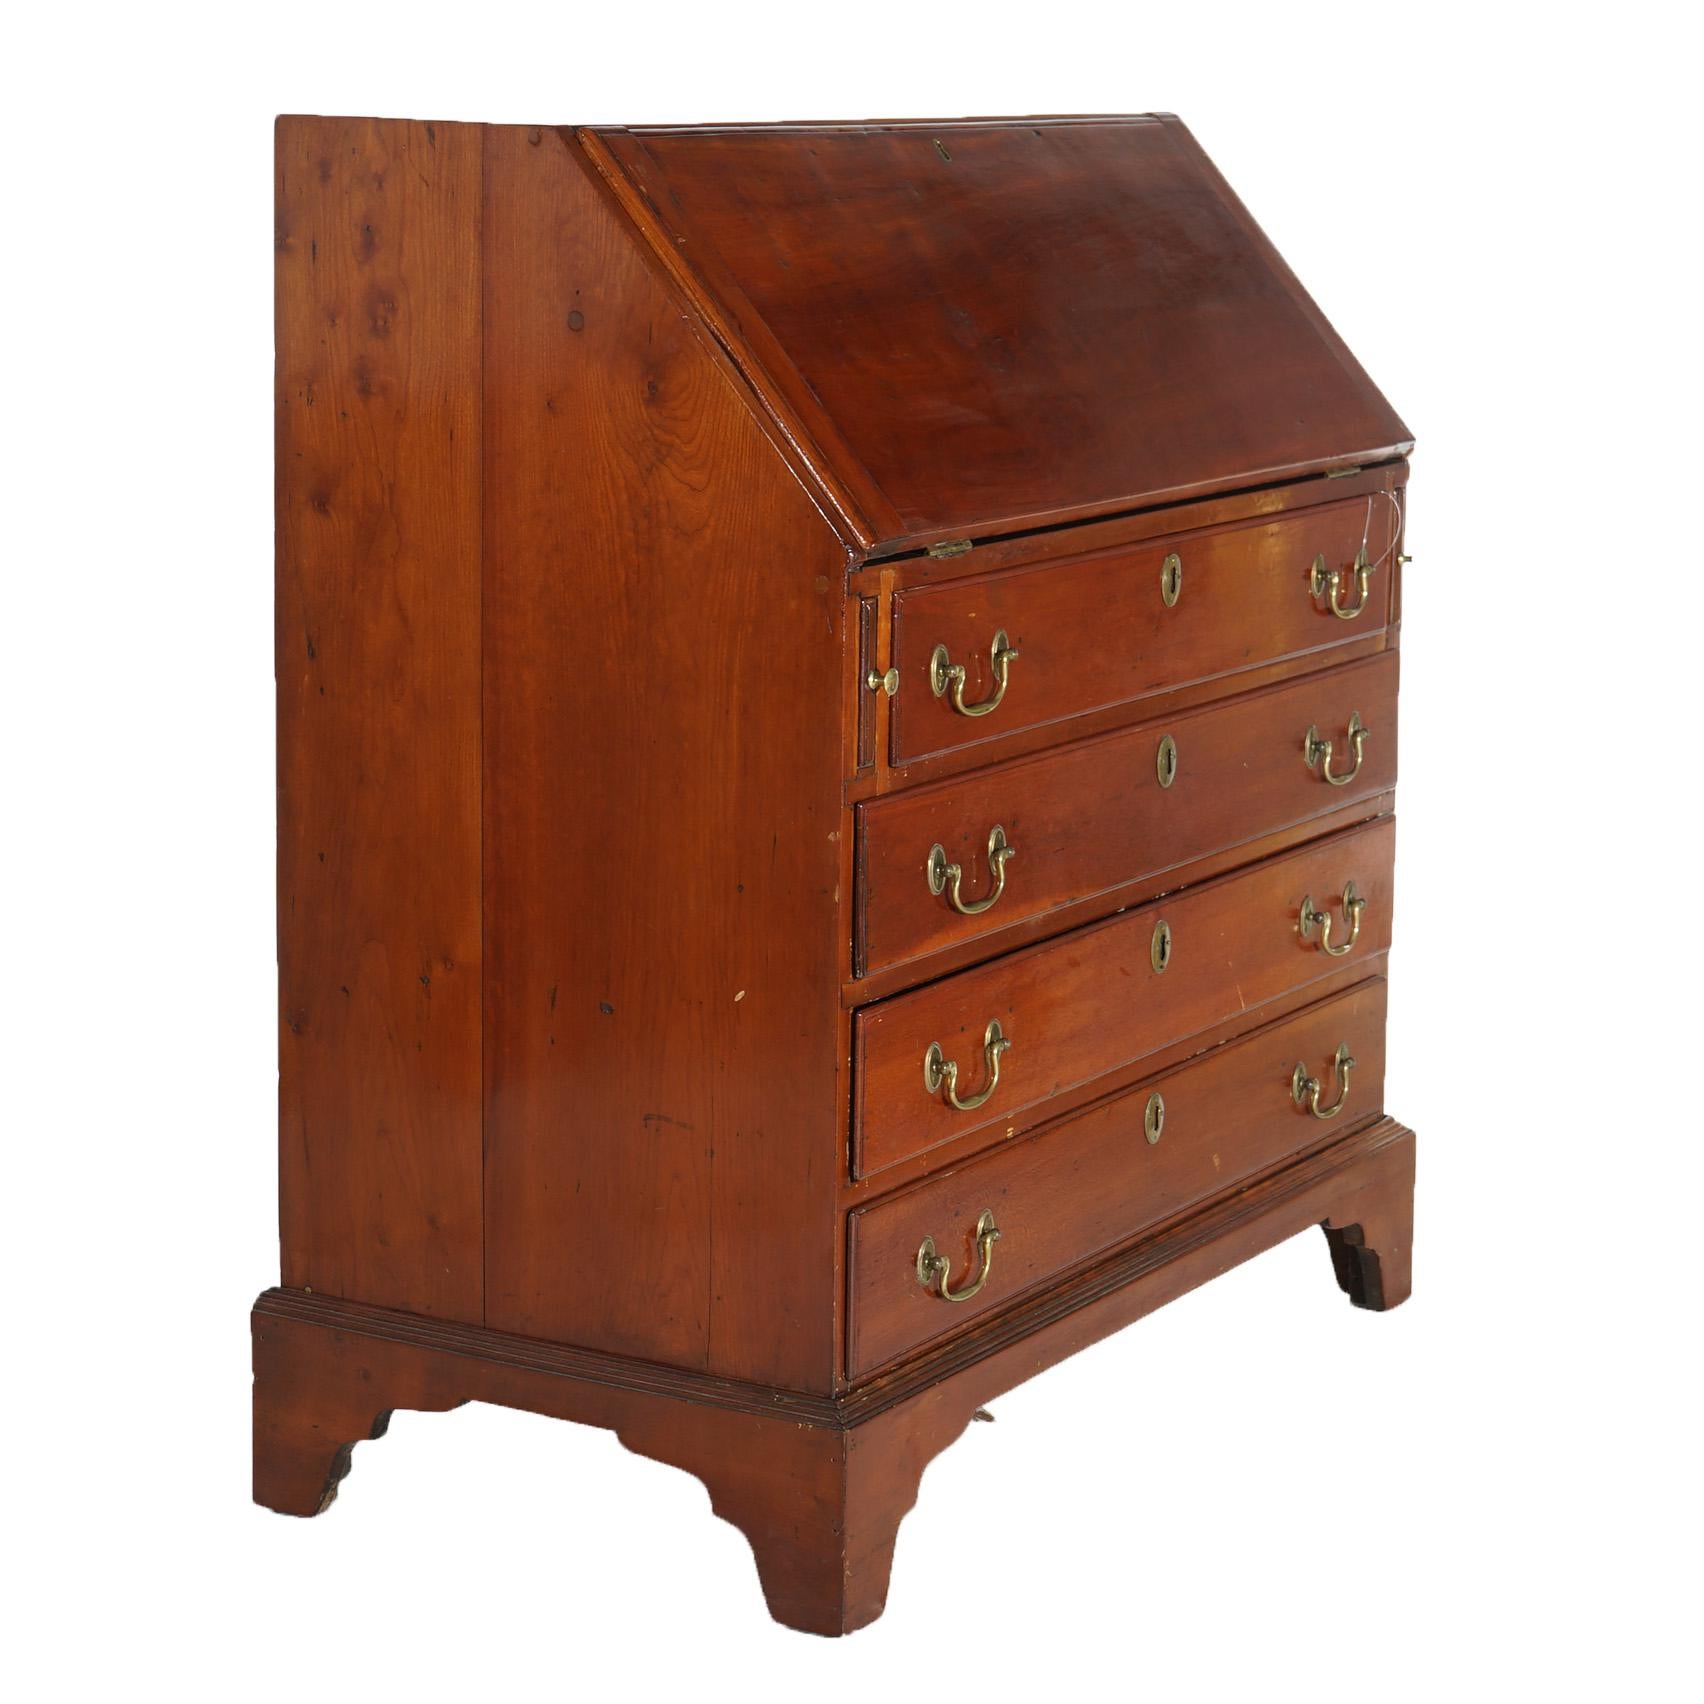 19th Century Antique Chippendale Cherry Slant-Front Desk with Four Drawers Circa 1830